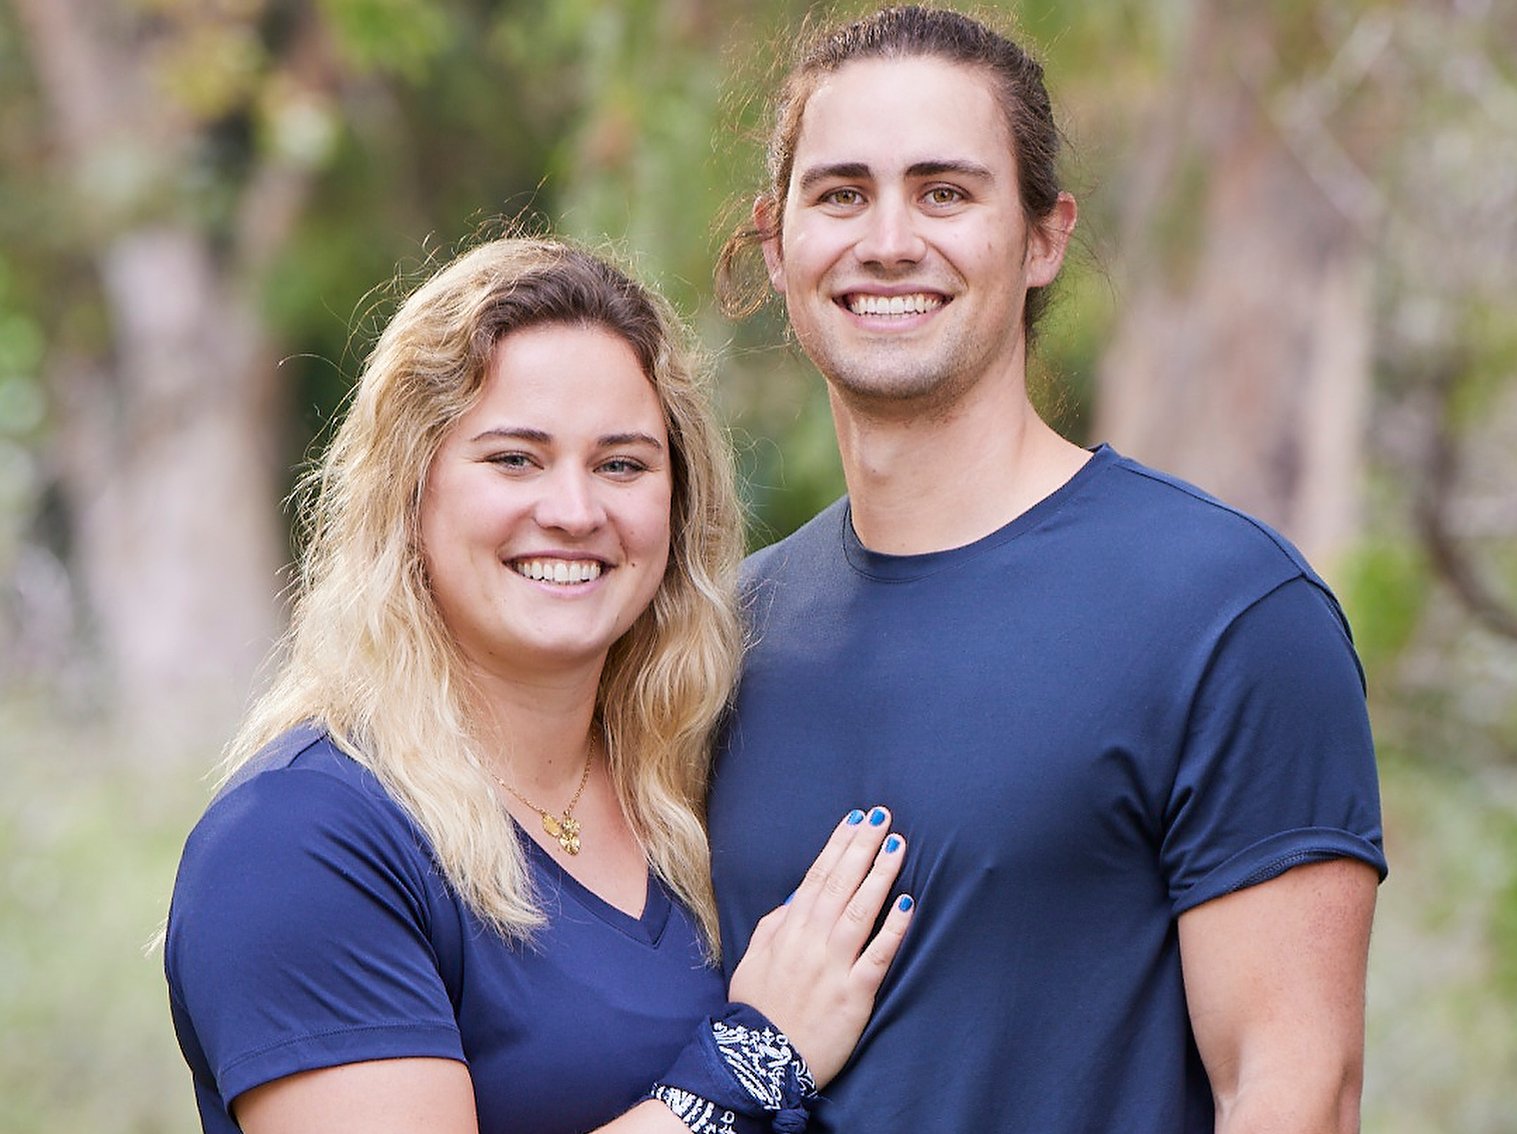 Abby Garrett and Will Freeman pose together in blue shirts on 'The Amazing Race 34'.